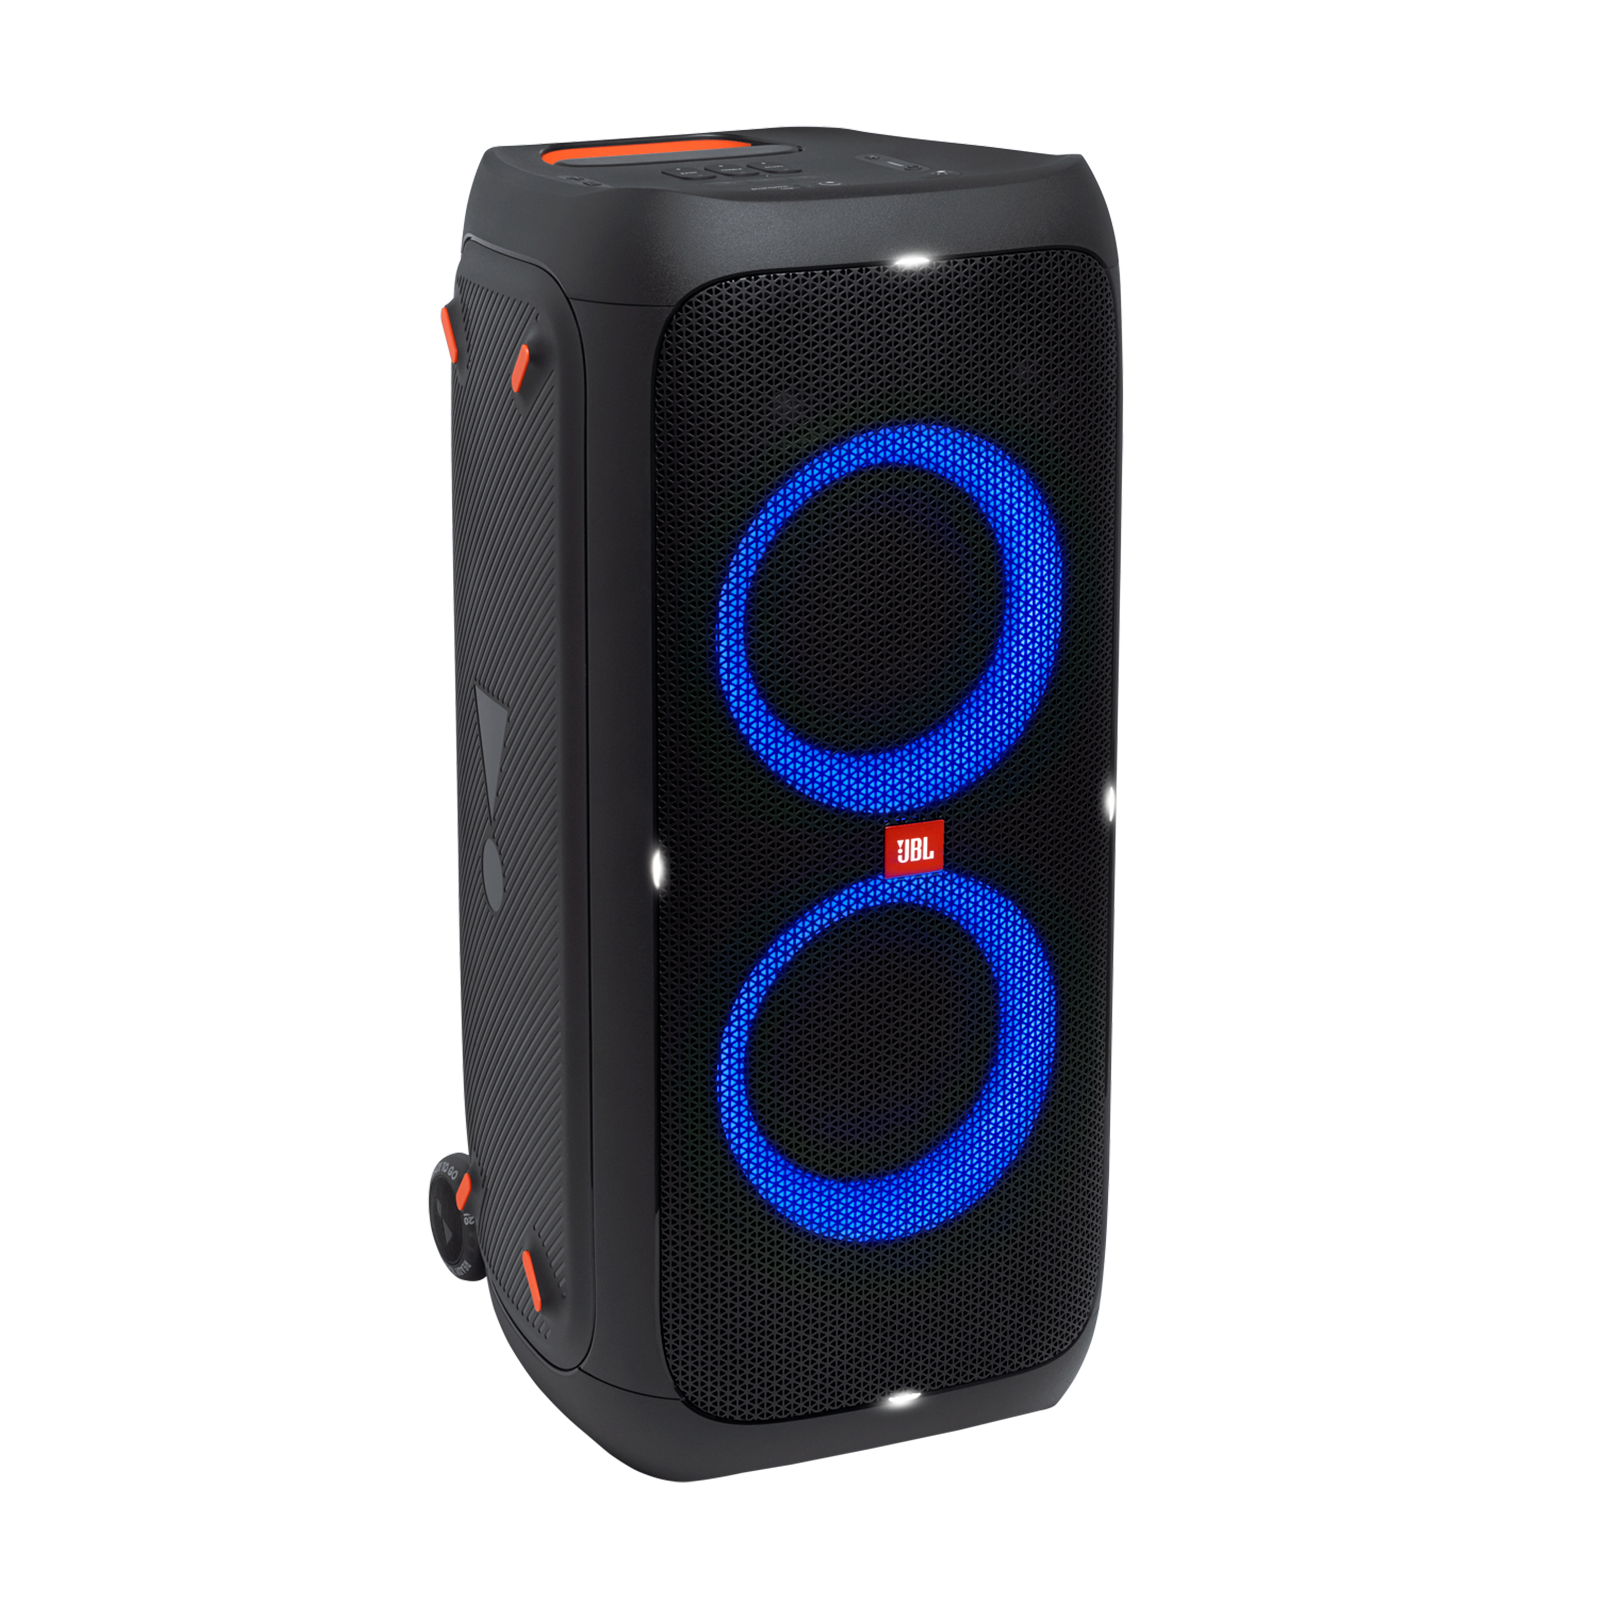 JBL Partybox 310 - Black - Portable party speaker with dazzling lights and powerful JBL Pro Sound - Hero